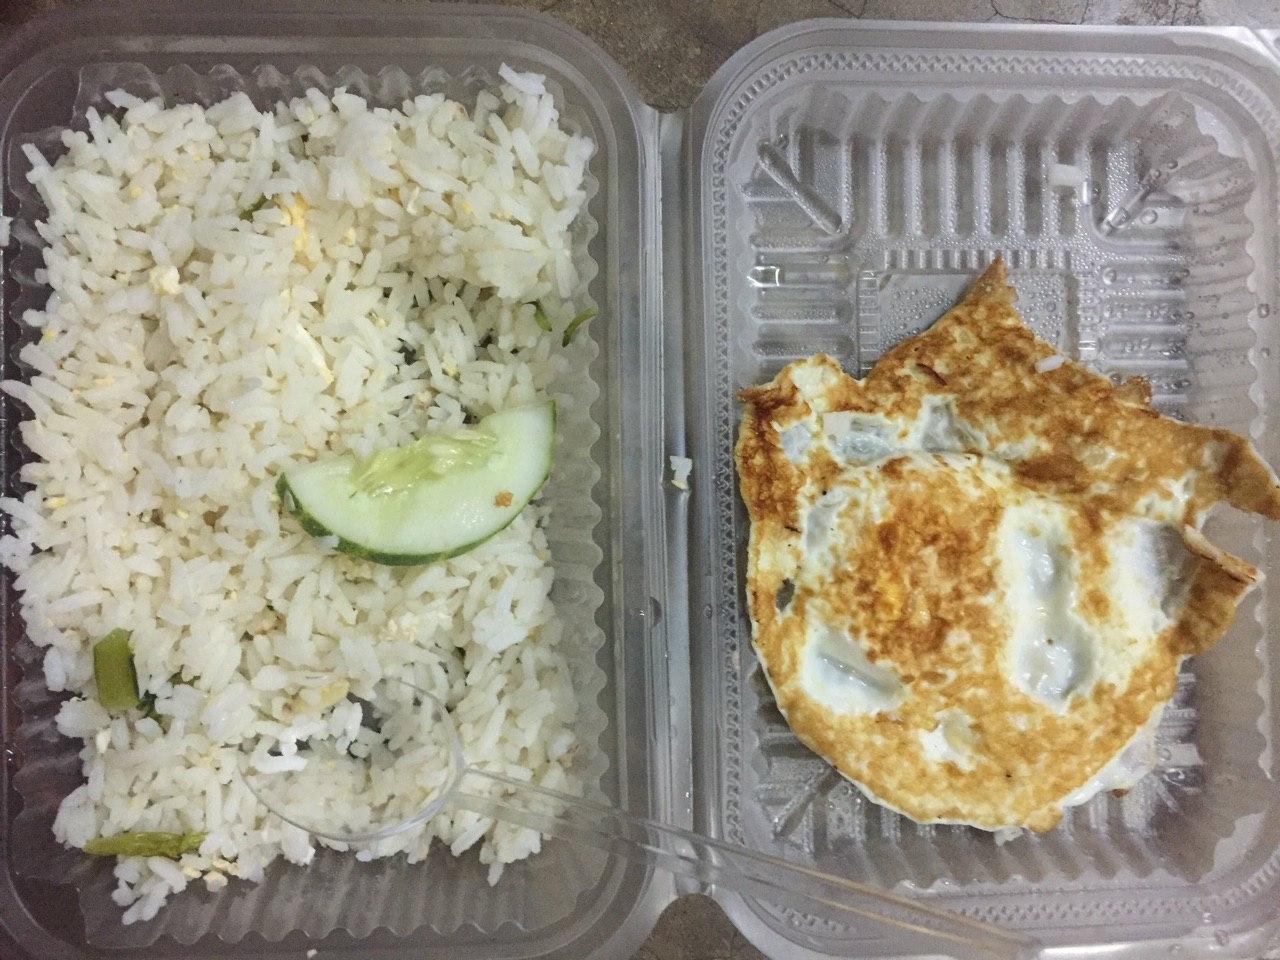 Malaysian University Student Complains About Quality of Free Food Given, Netizens Outraged - WORLD OF BUZZ 10